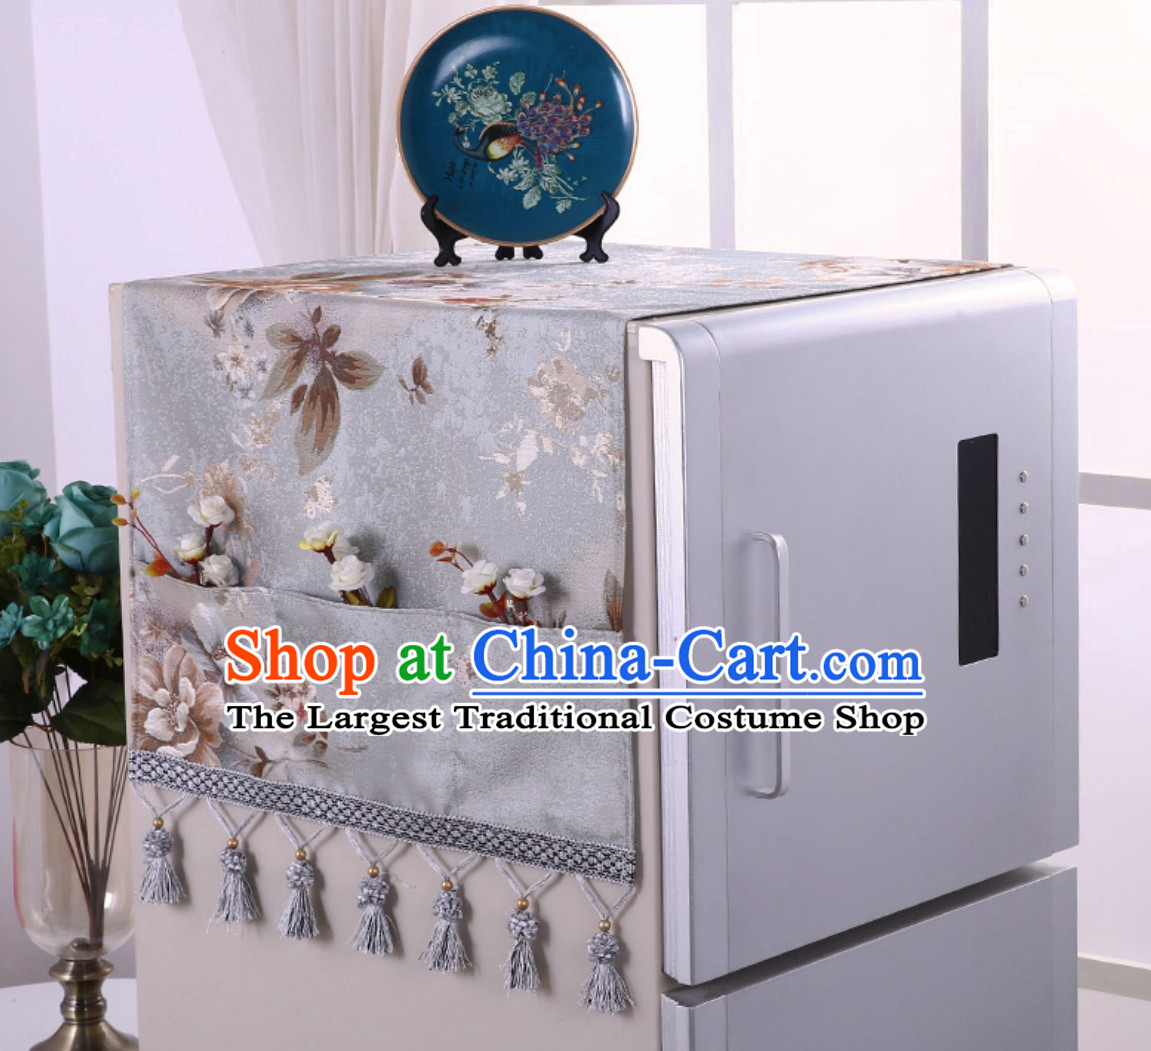 Handmade Beautiful Covers of Commercial Refrigerator